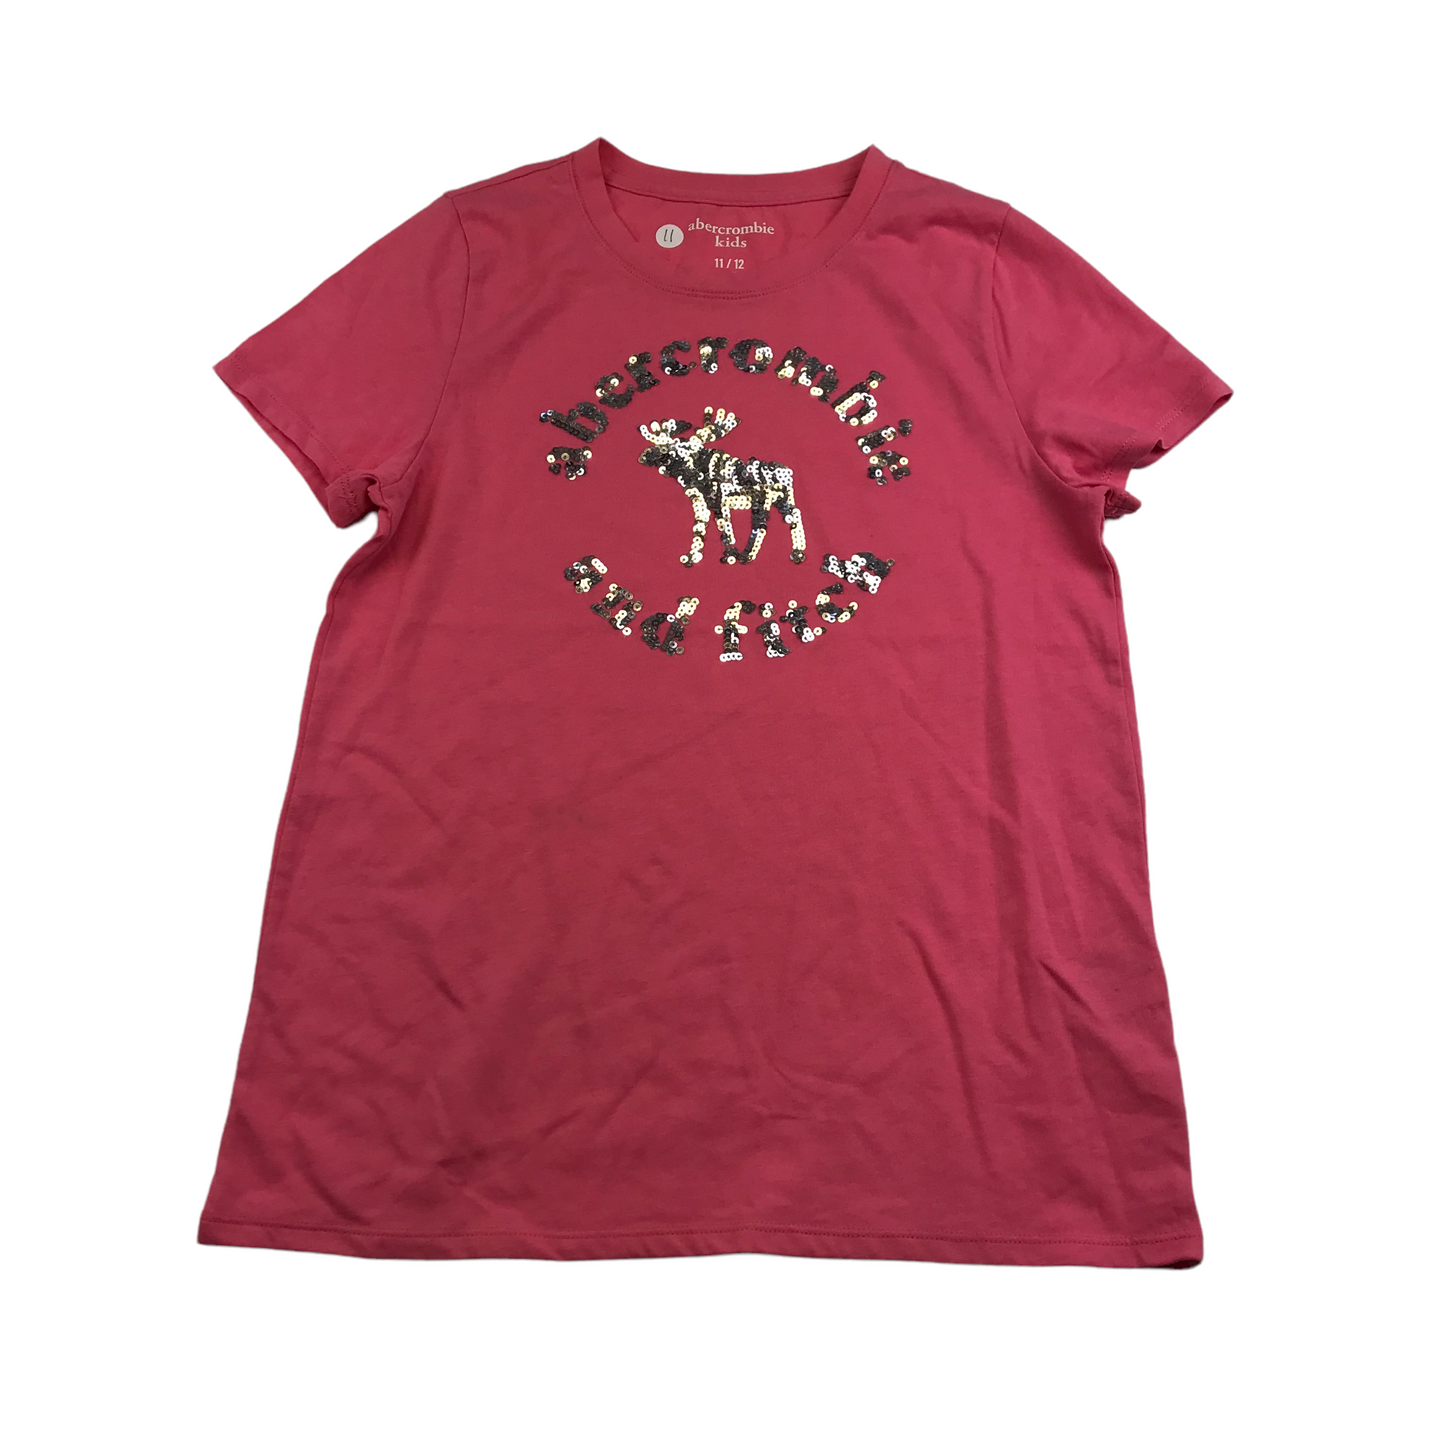 Abercrombie Pink Sequin T-shirt Age 11